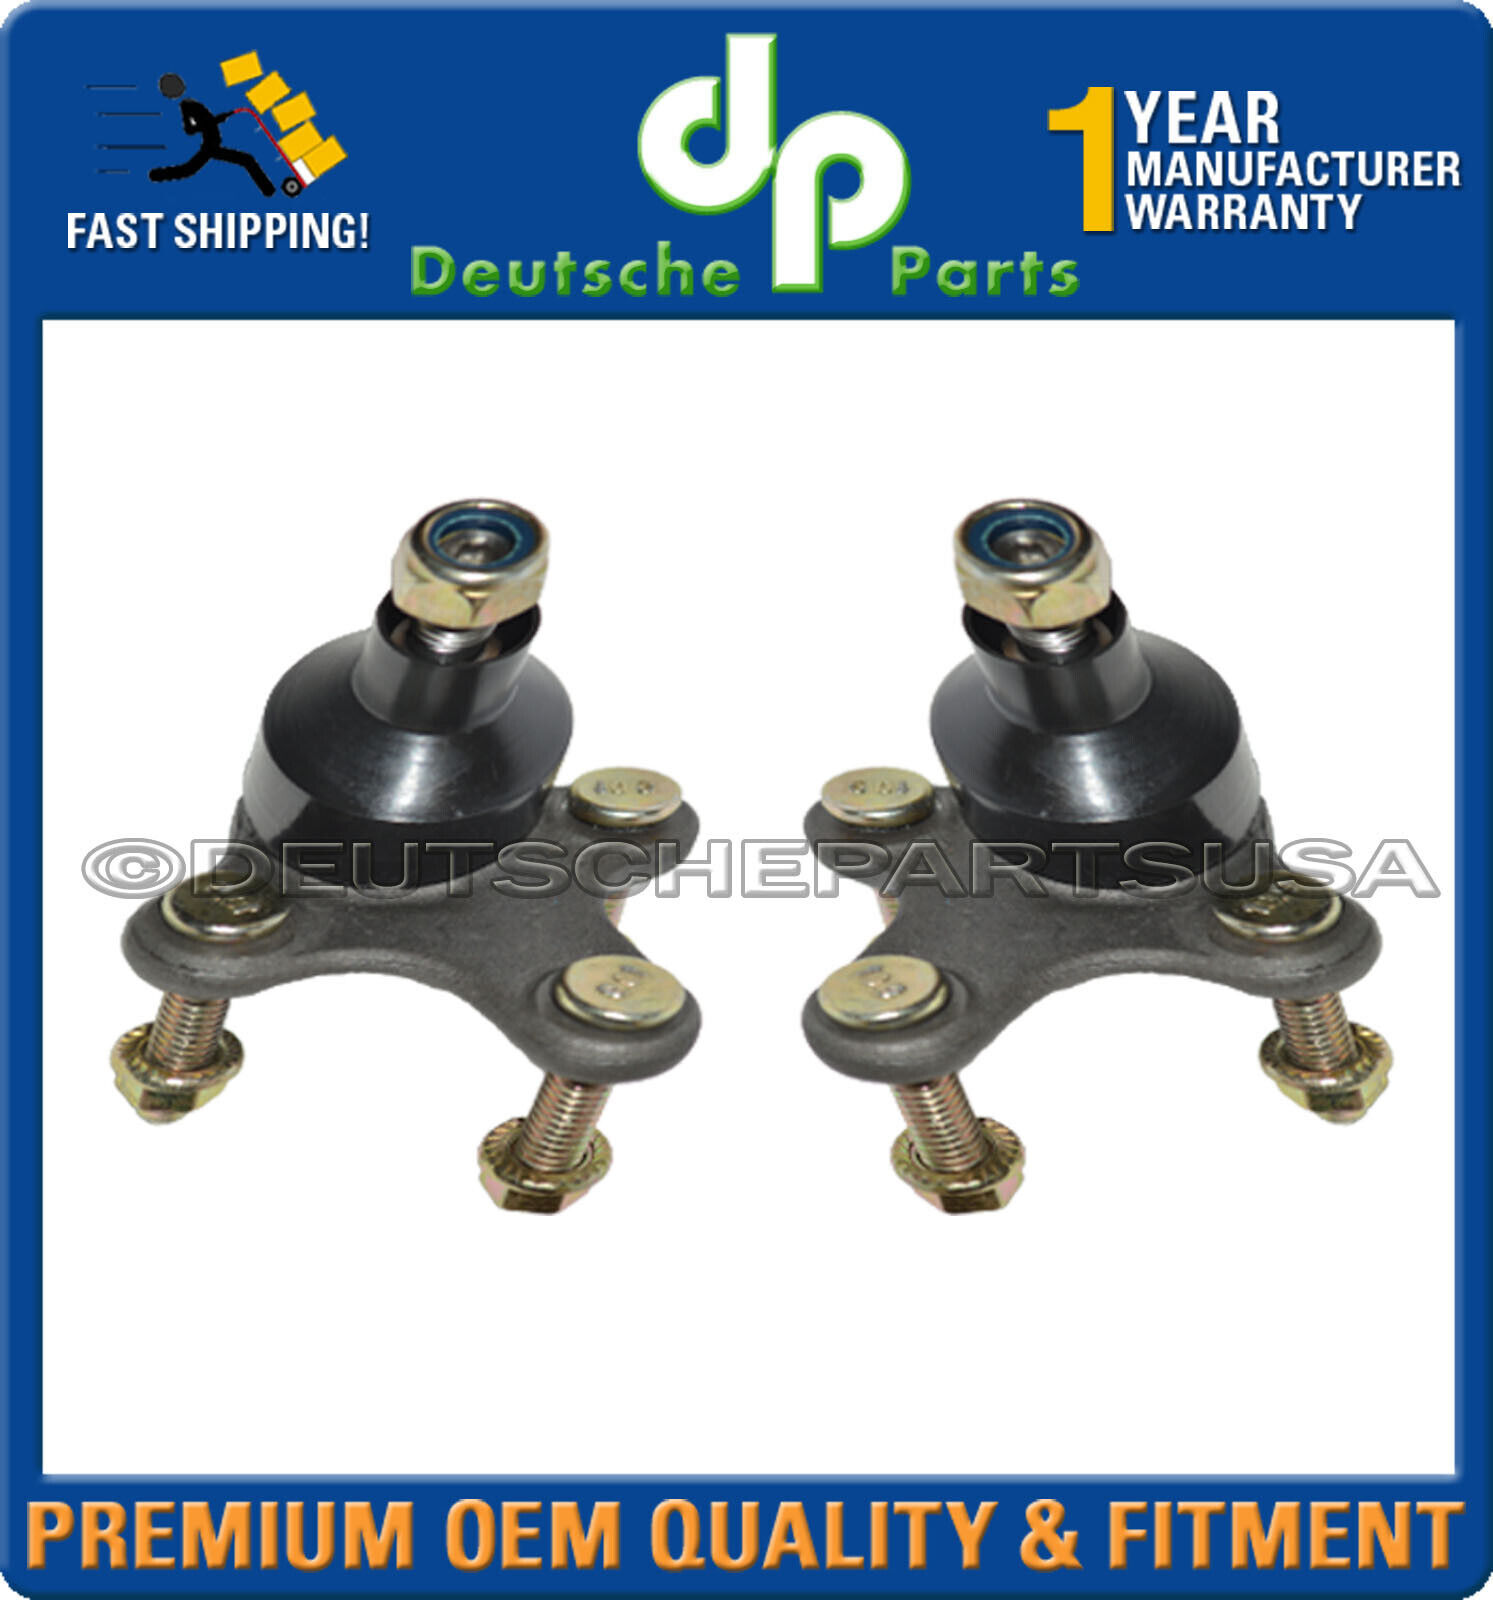 A3 VW EOS GTI GOLF JETTA RABBIT CONTROL ARM ARMS BALL JOINT JOINTS L+R SET 2